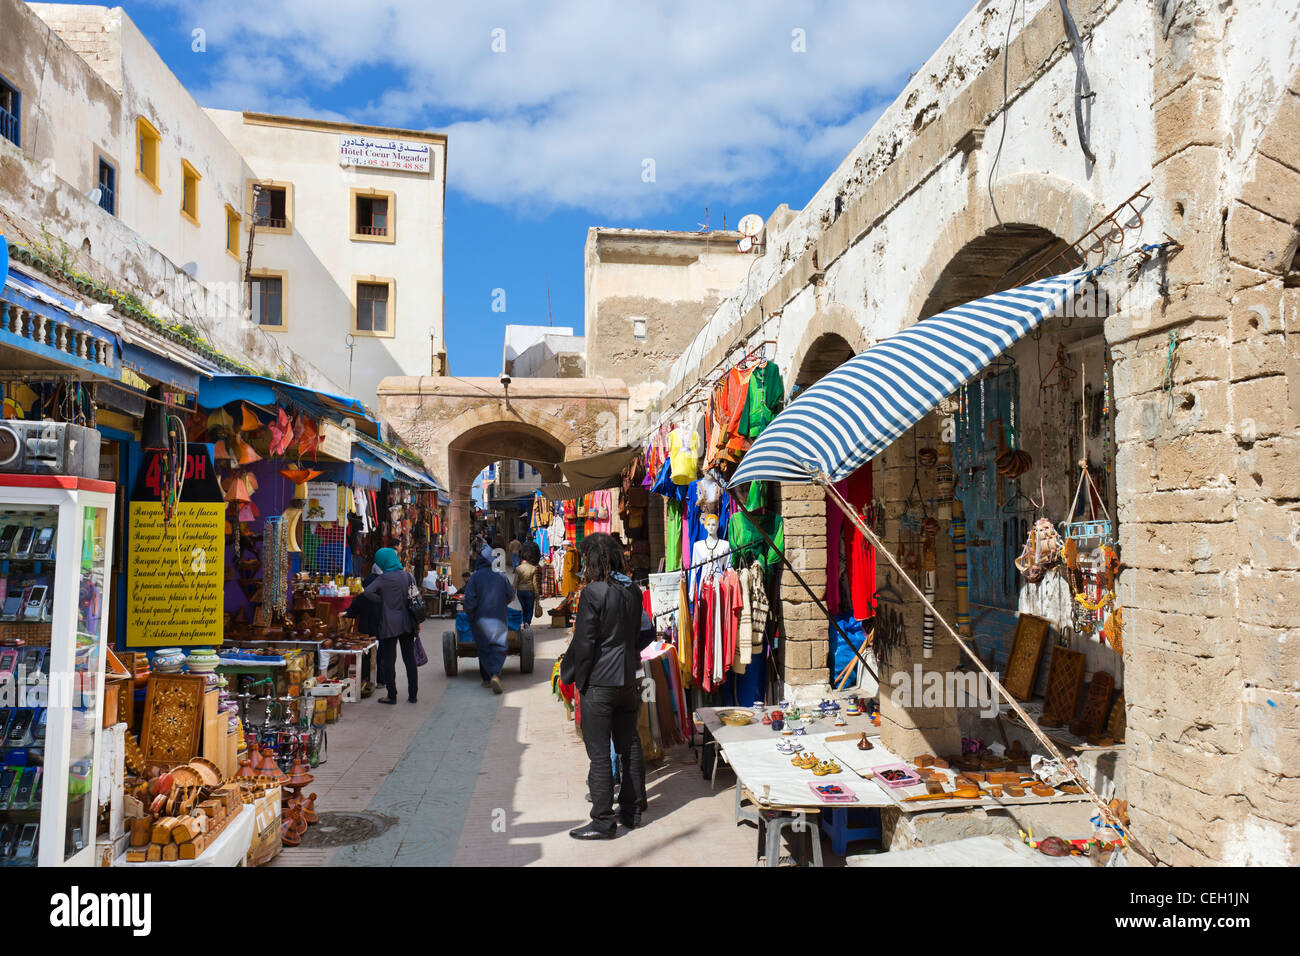 Shops and stalls in the Medina, Essaouira, Morocco, North Africa Stock Photo